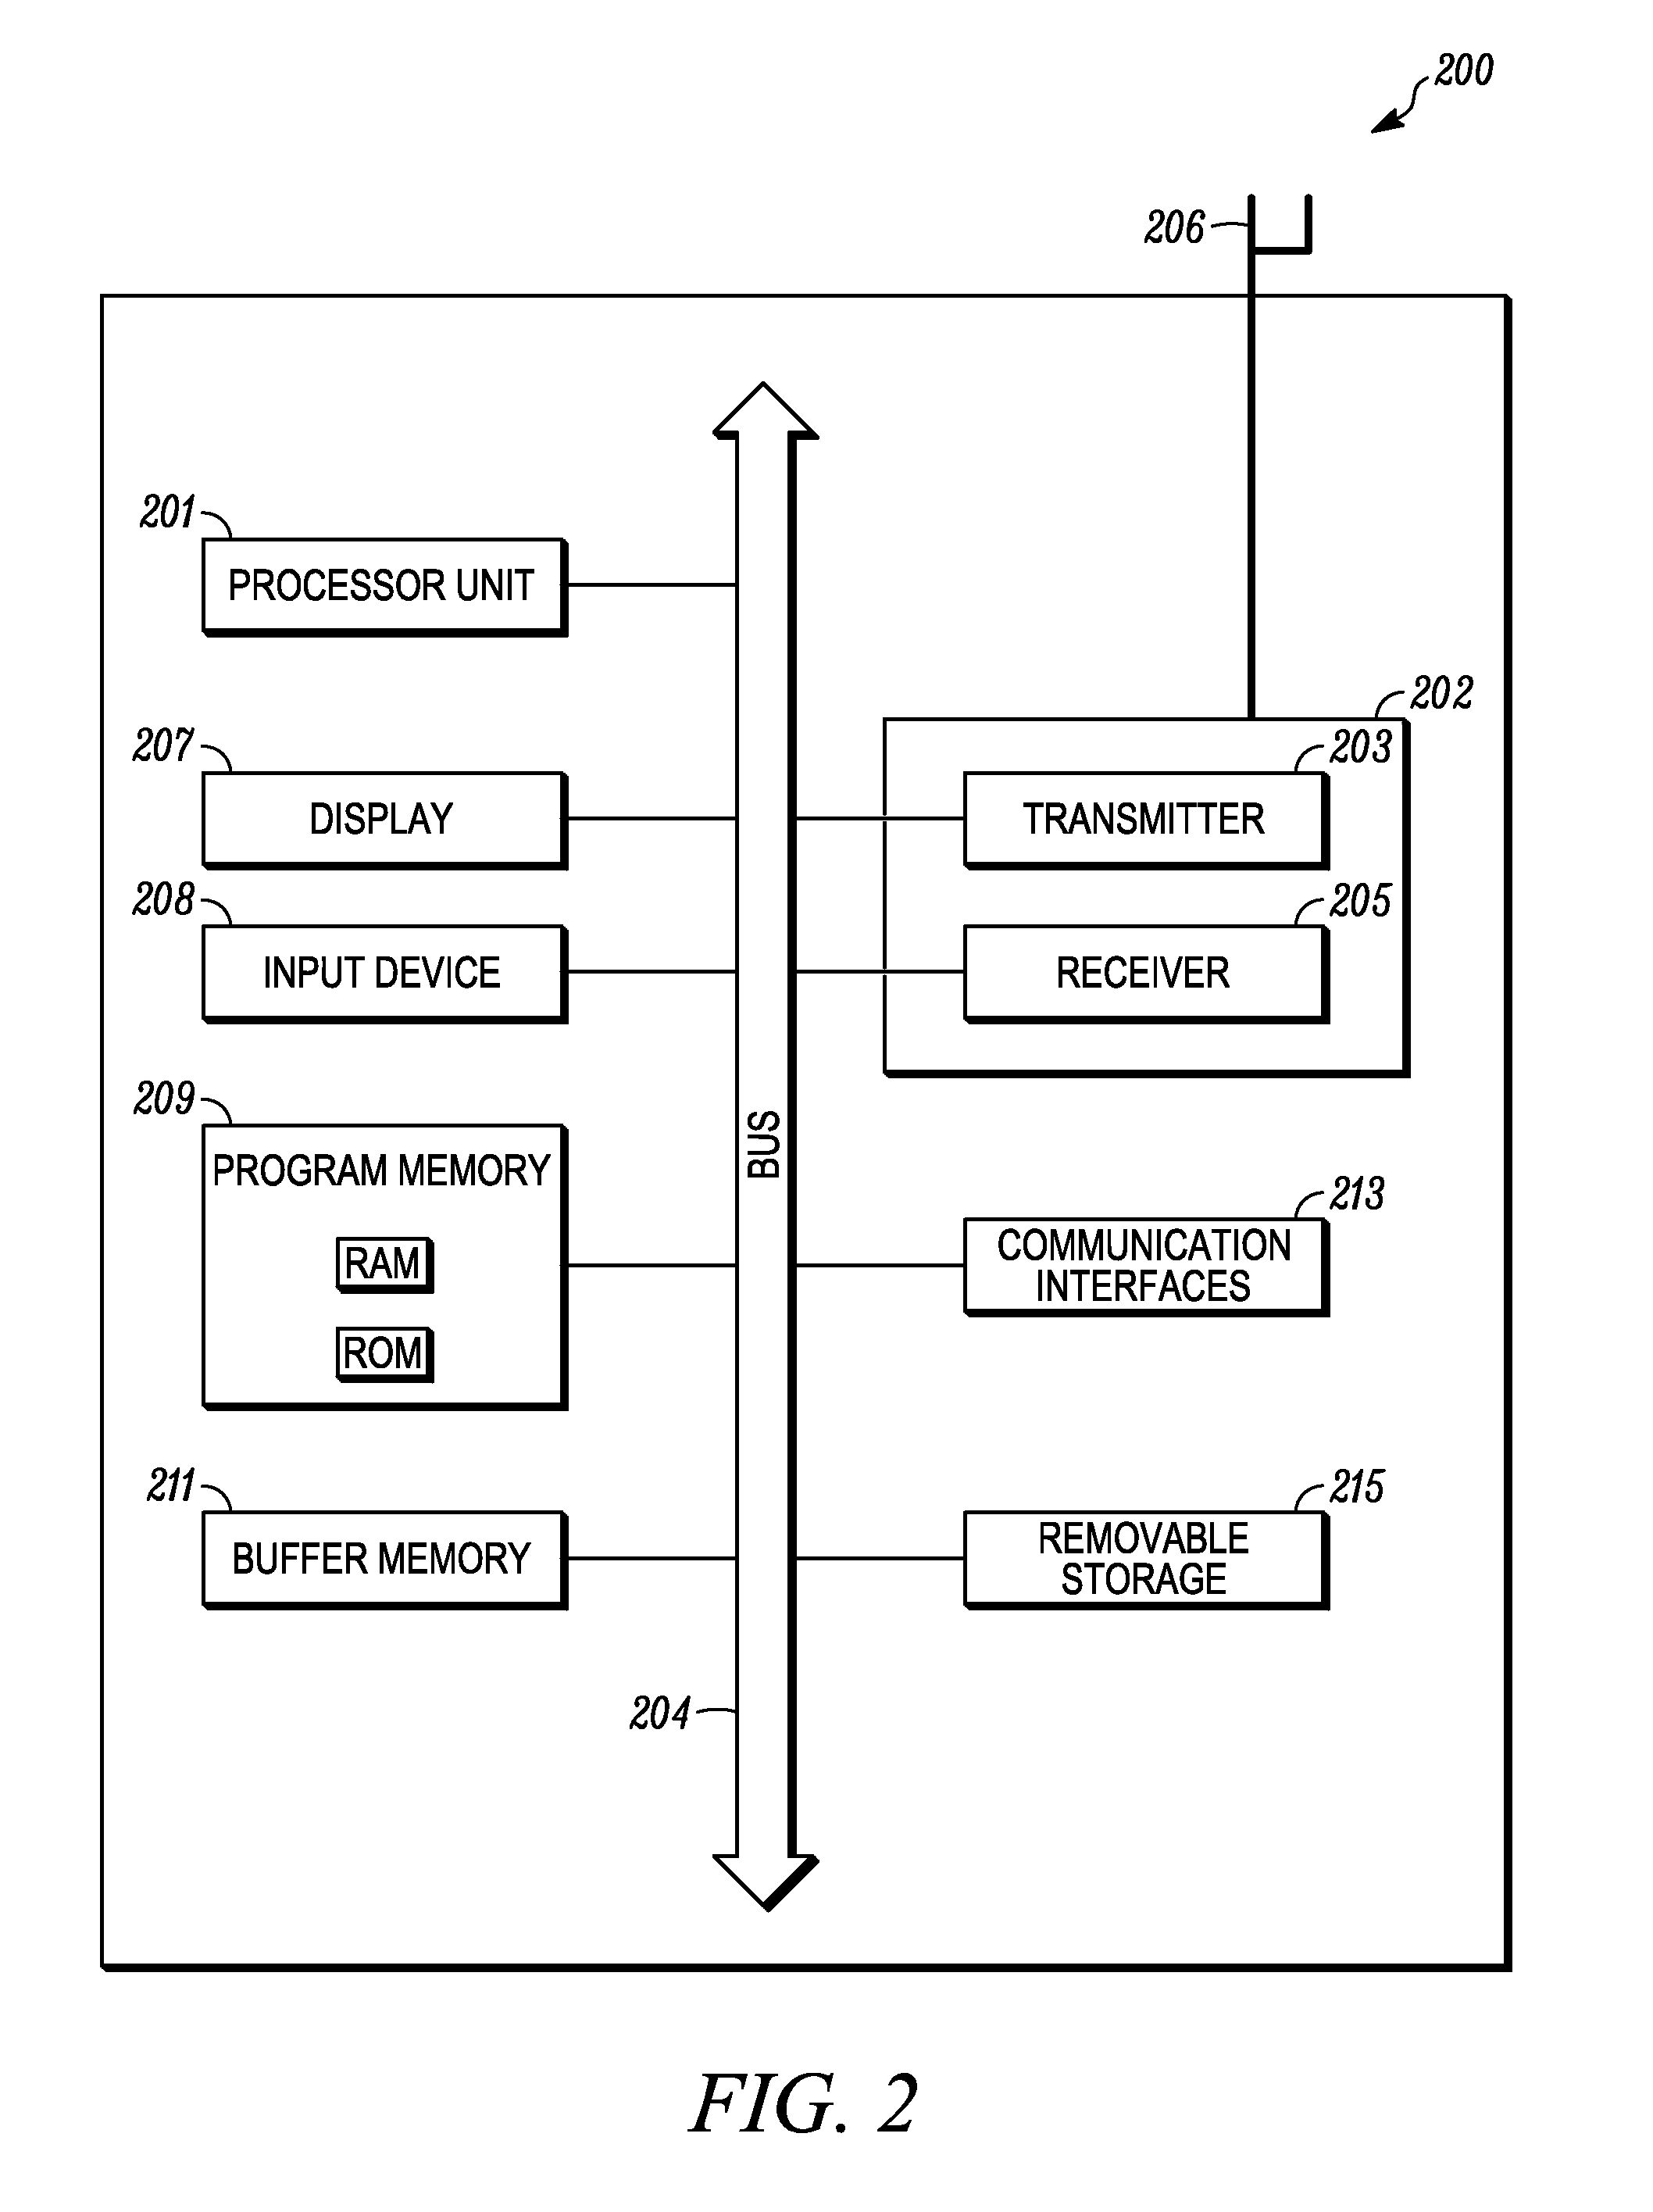 Method of triggering a key delivery from a mesh key distributor